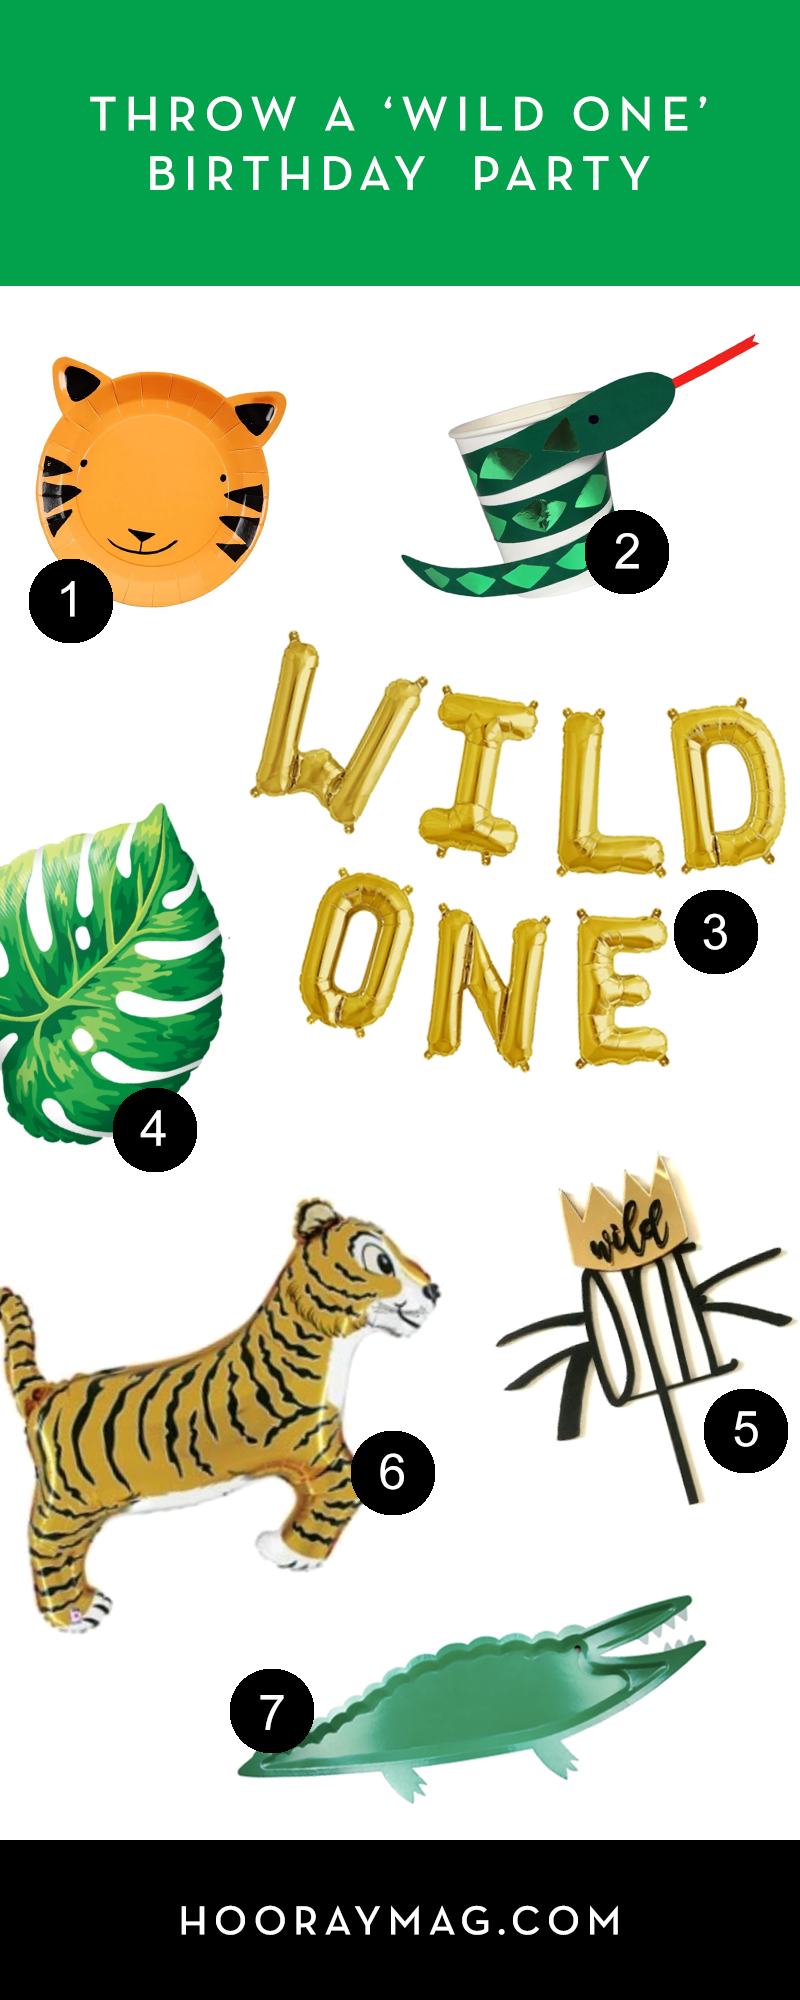 How-to-throw-a-wild-one-themed-birthday-party